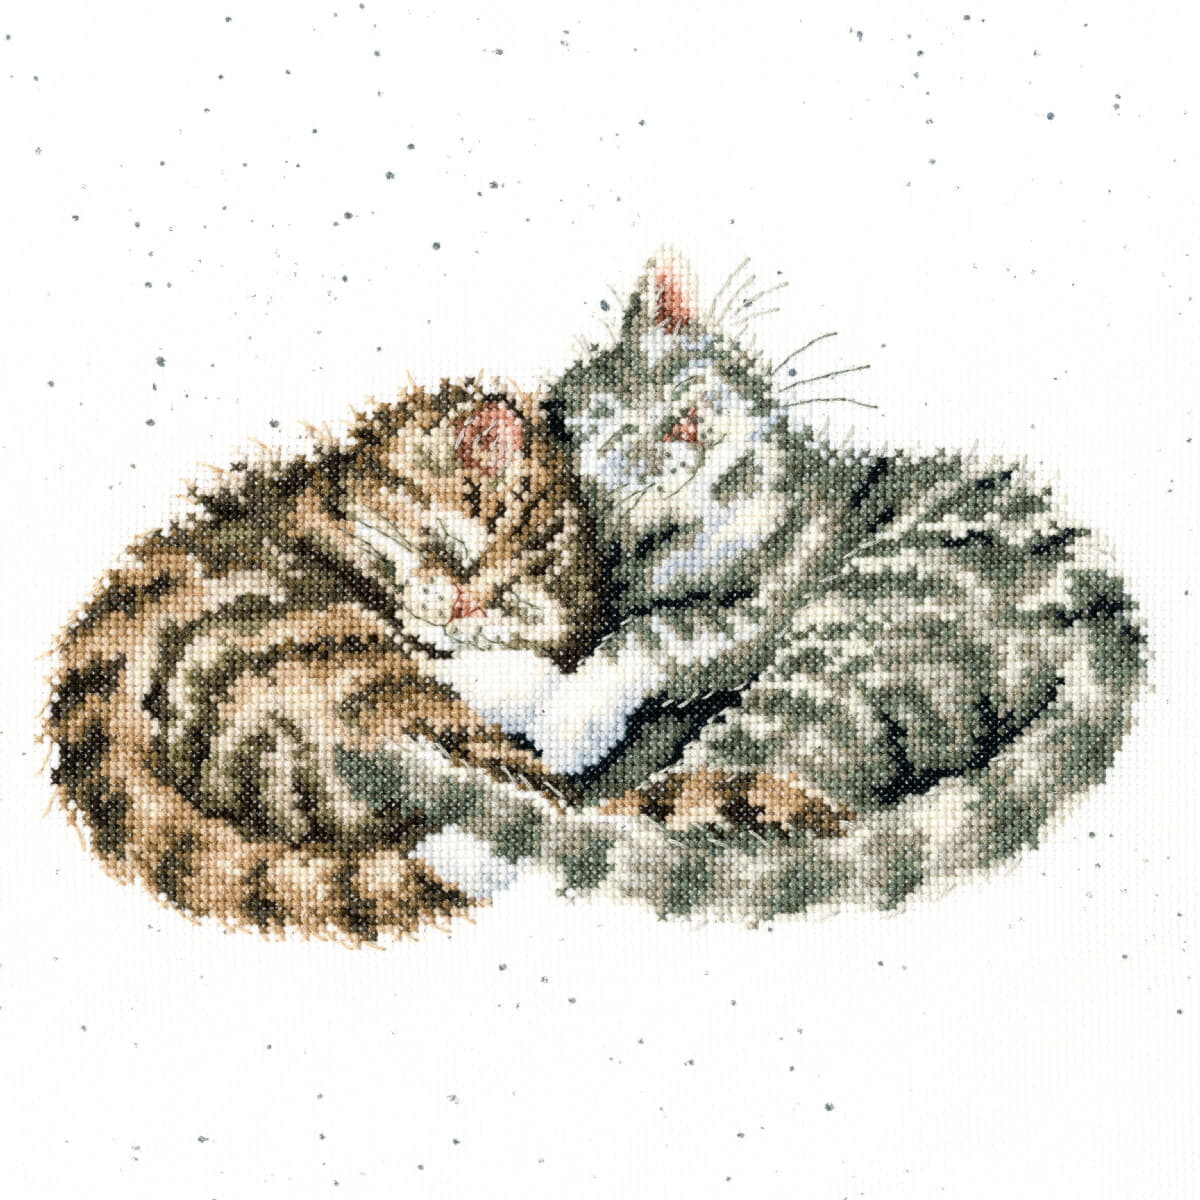 An embroidery pack from Bothy Threads showing two cats...